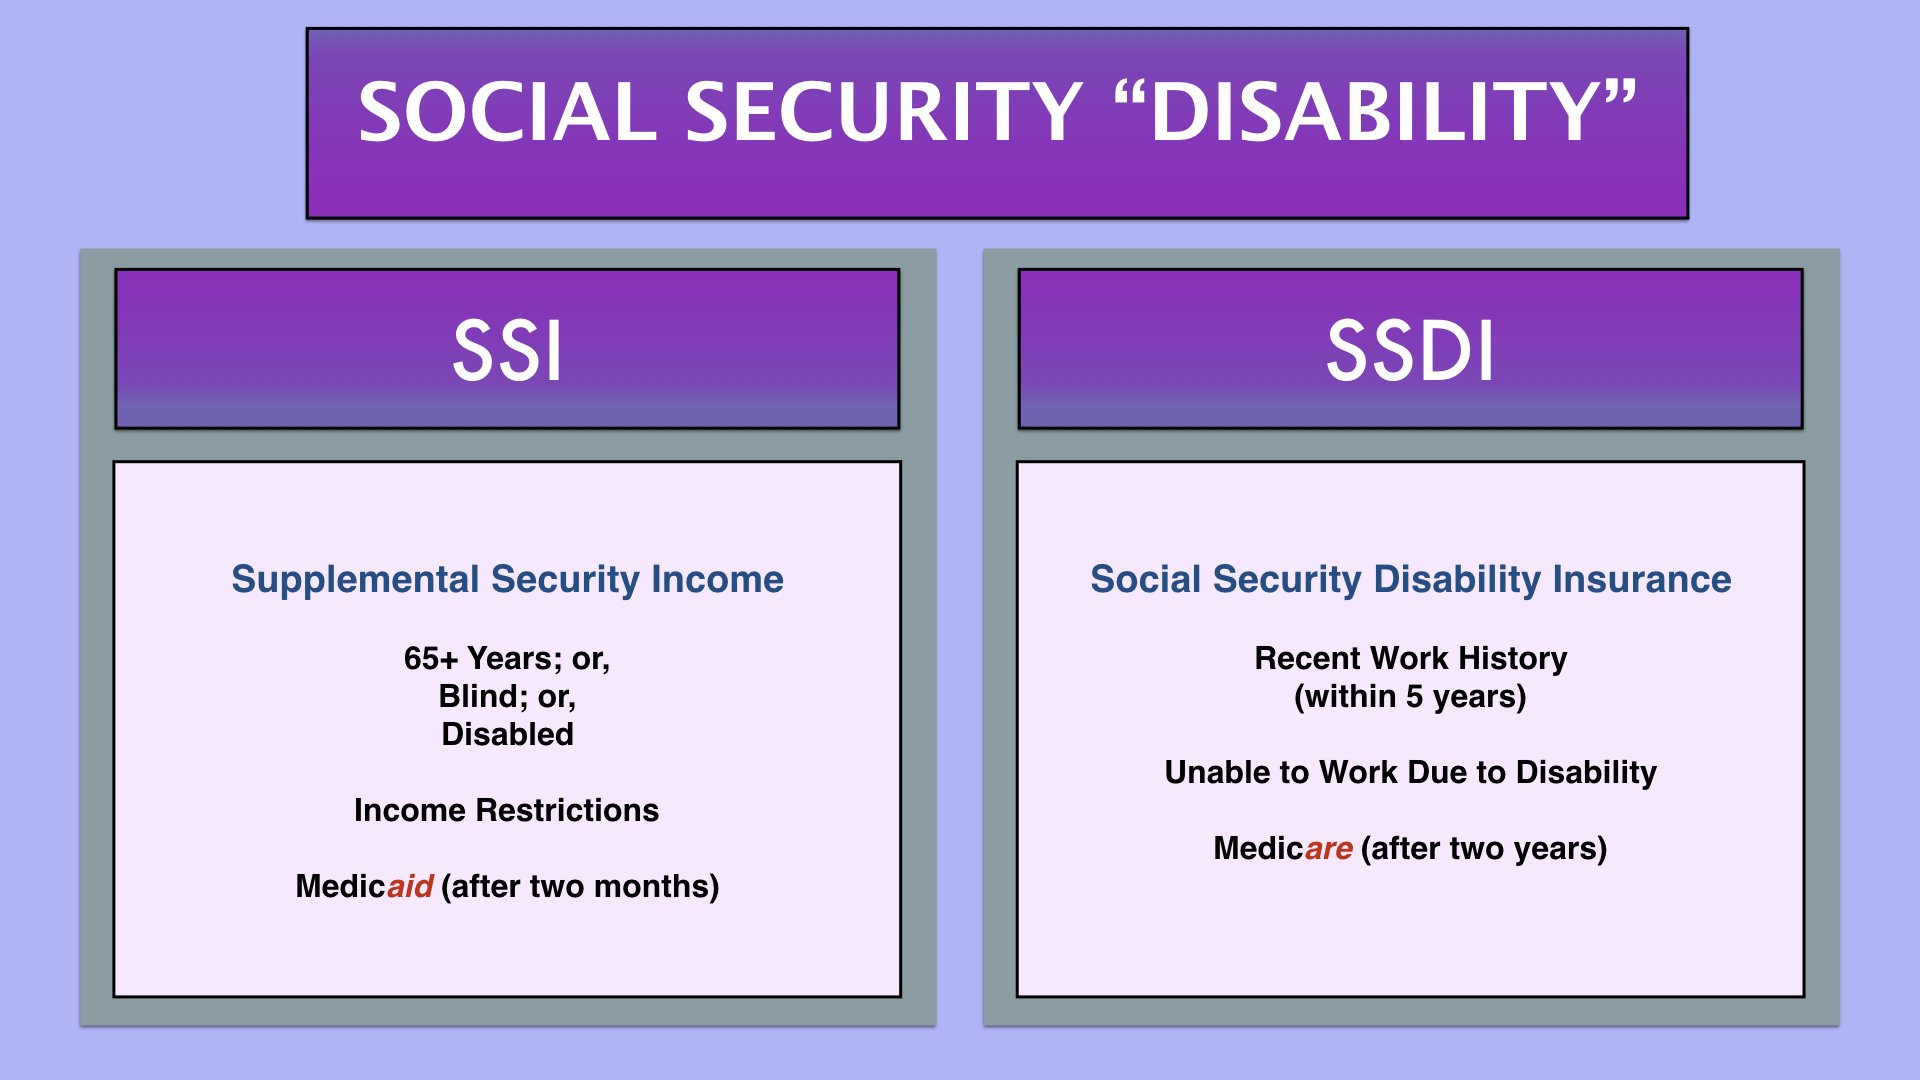 If Your SSI Was Denied Will Your SSDI be Denied Too?